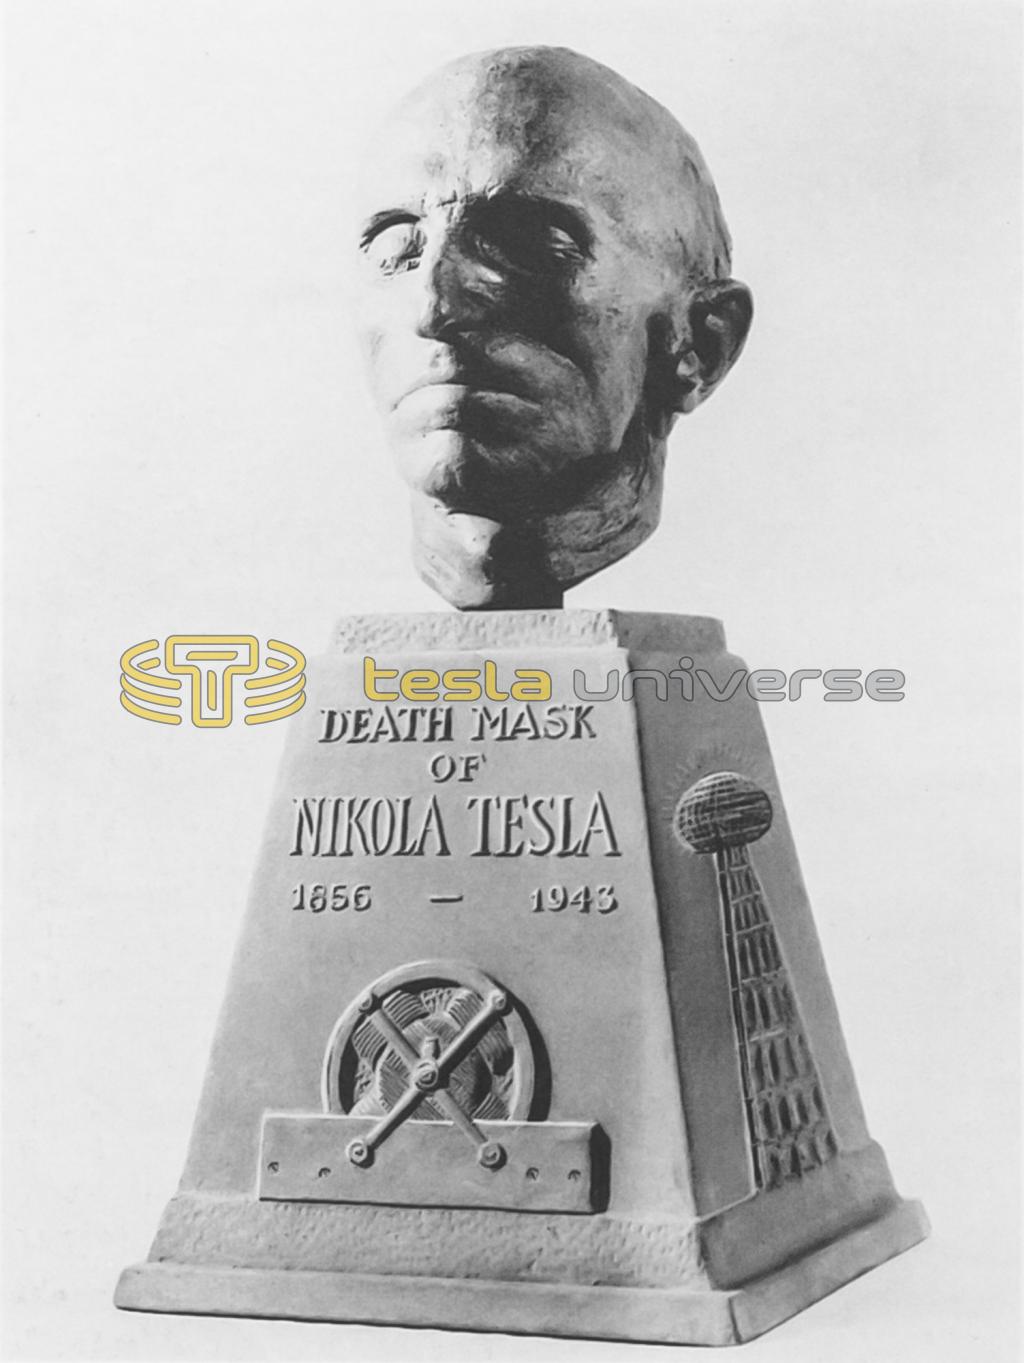 The Tesla death mask as it was originally commissioned